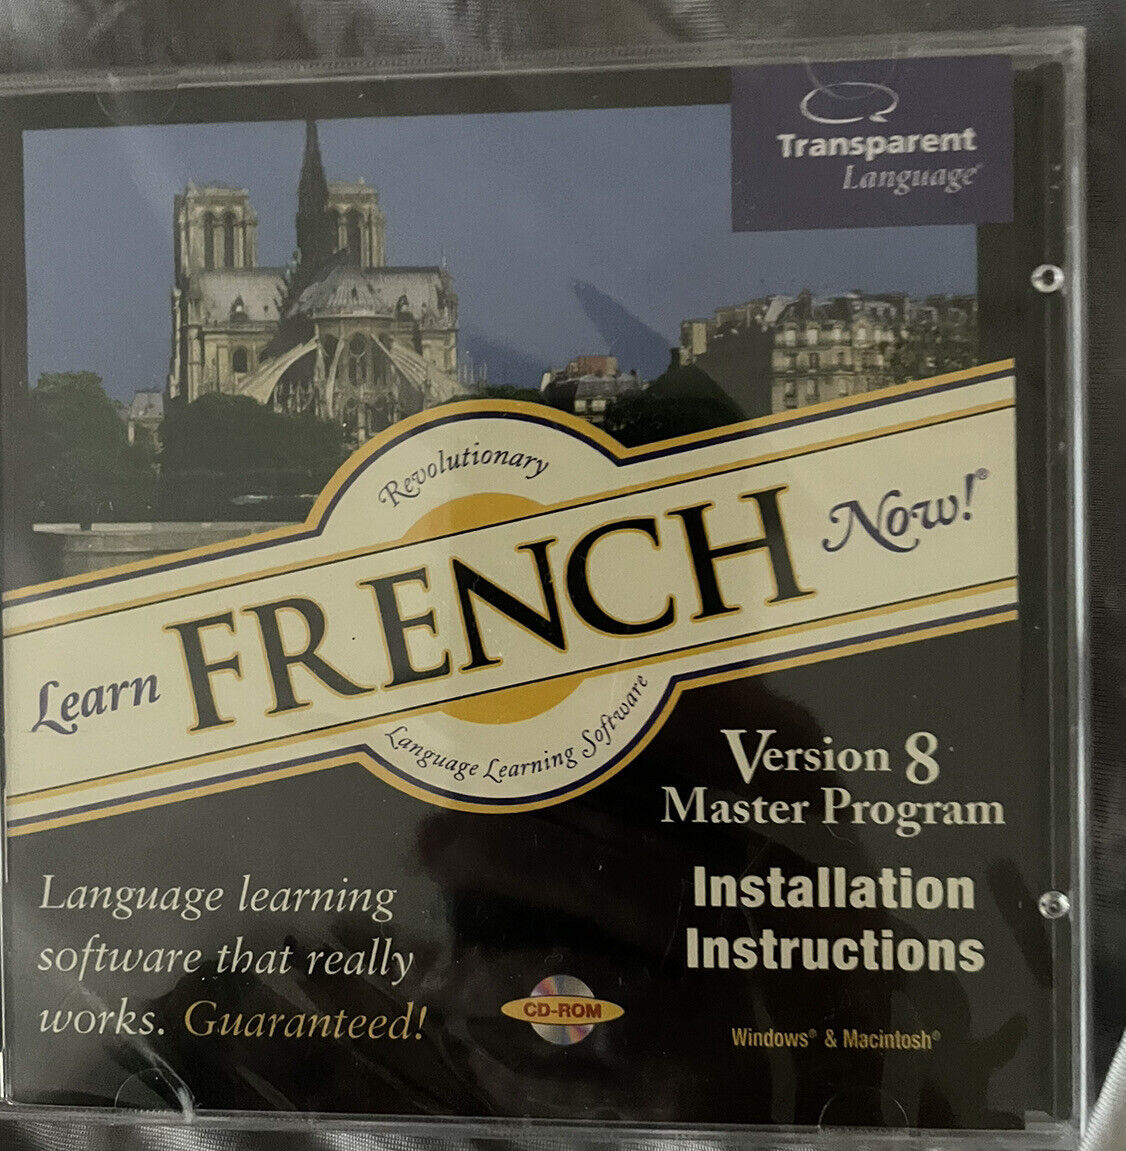 Learn French Now From Transparent Language Windows & Mac CD-Rom Version 8 Master